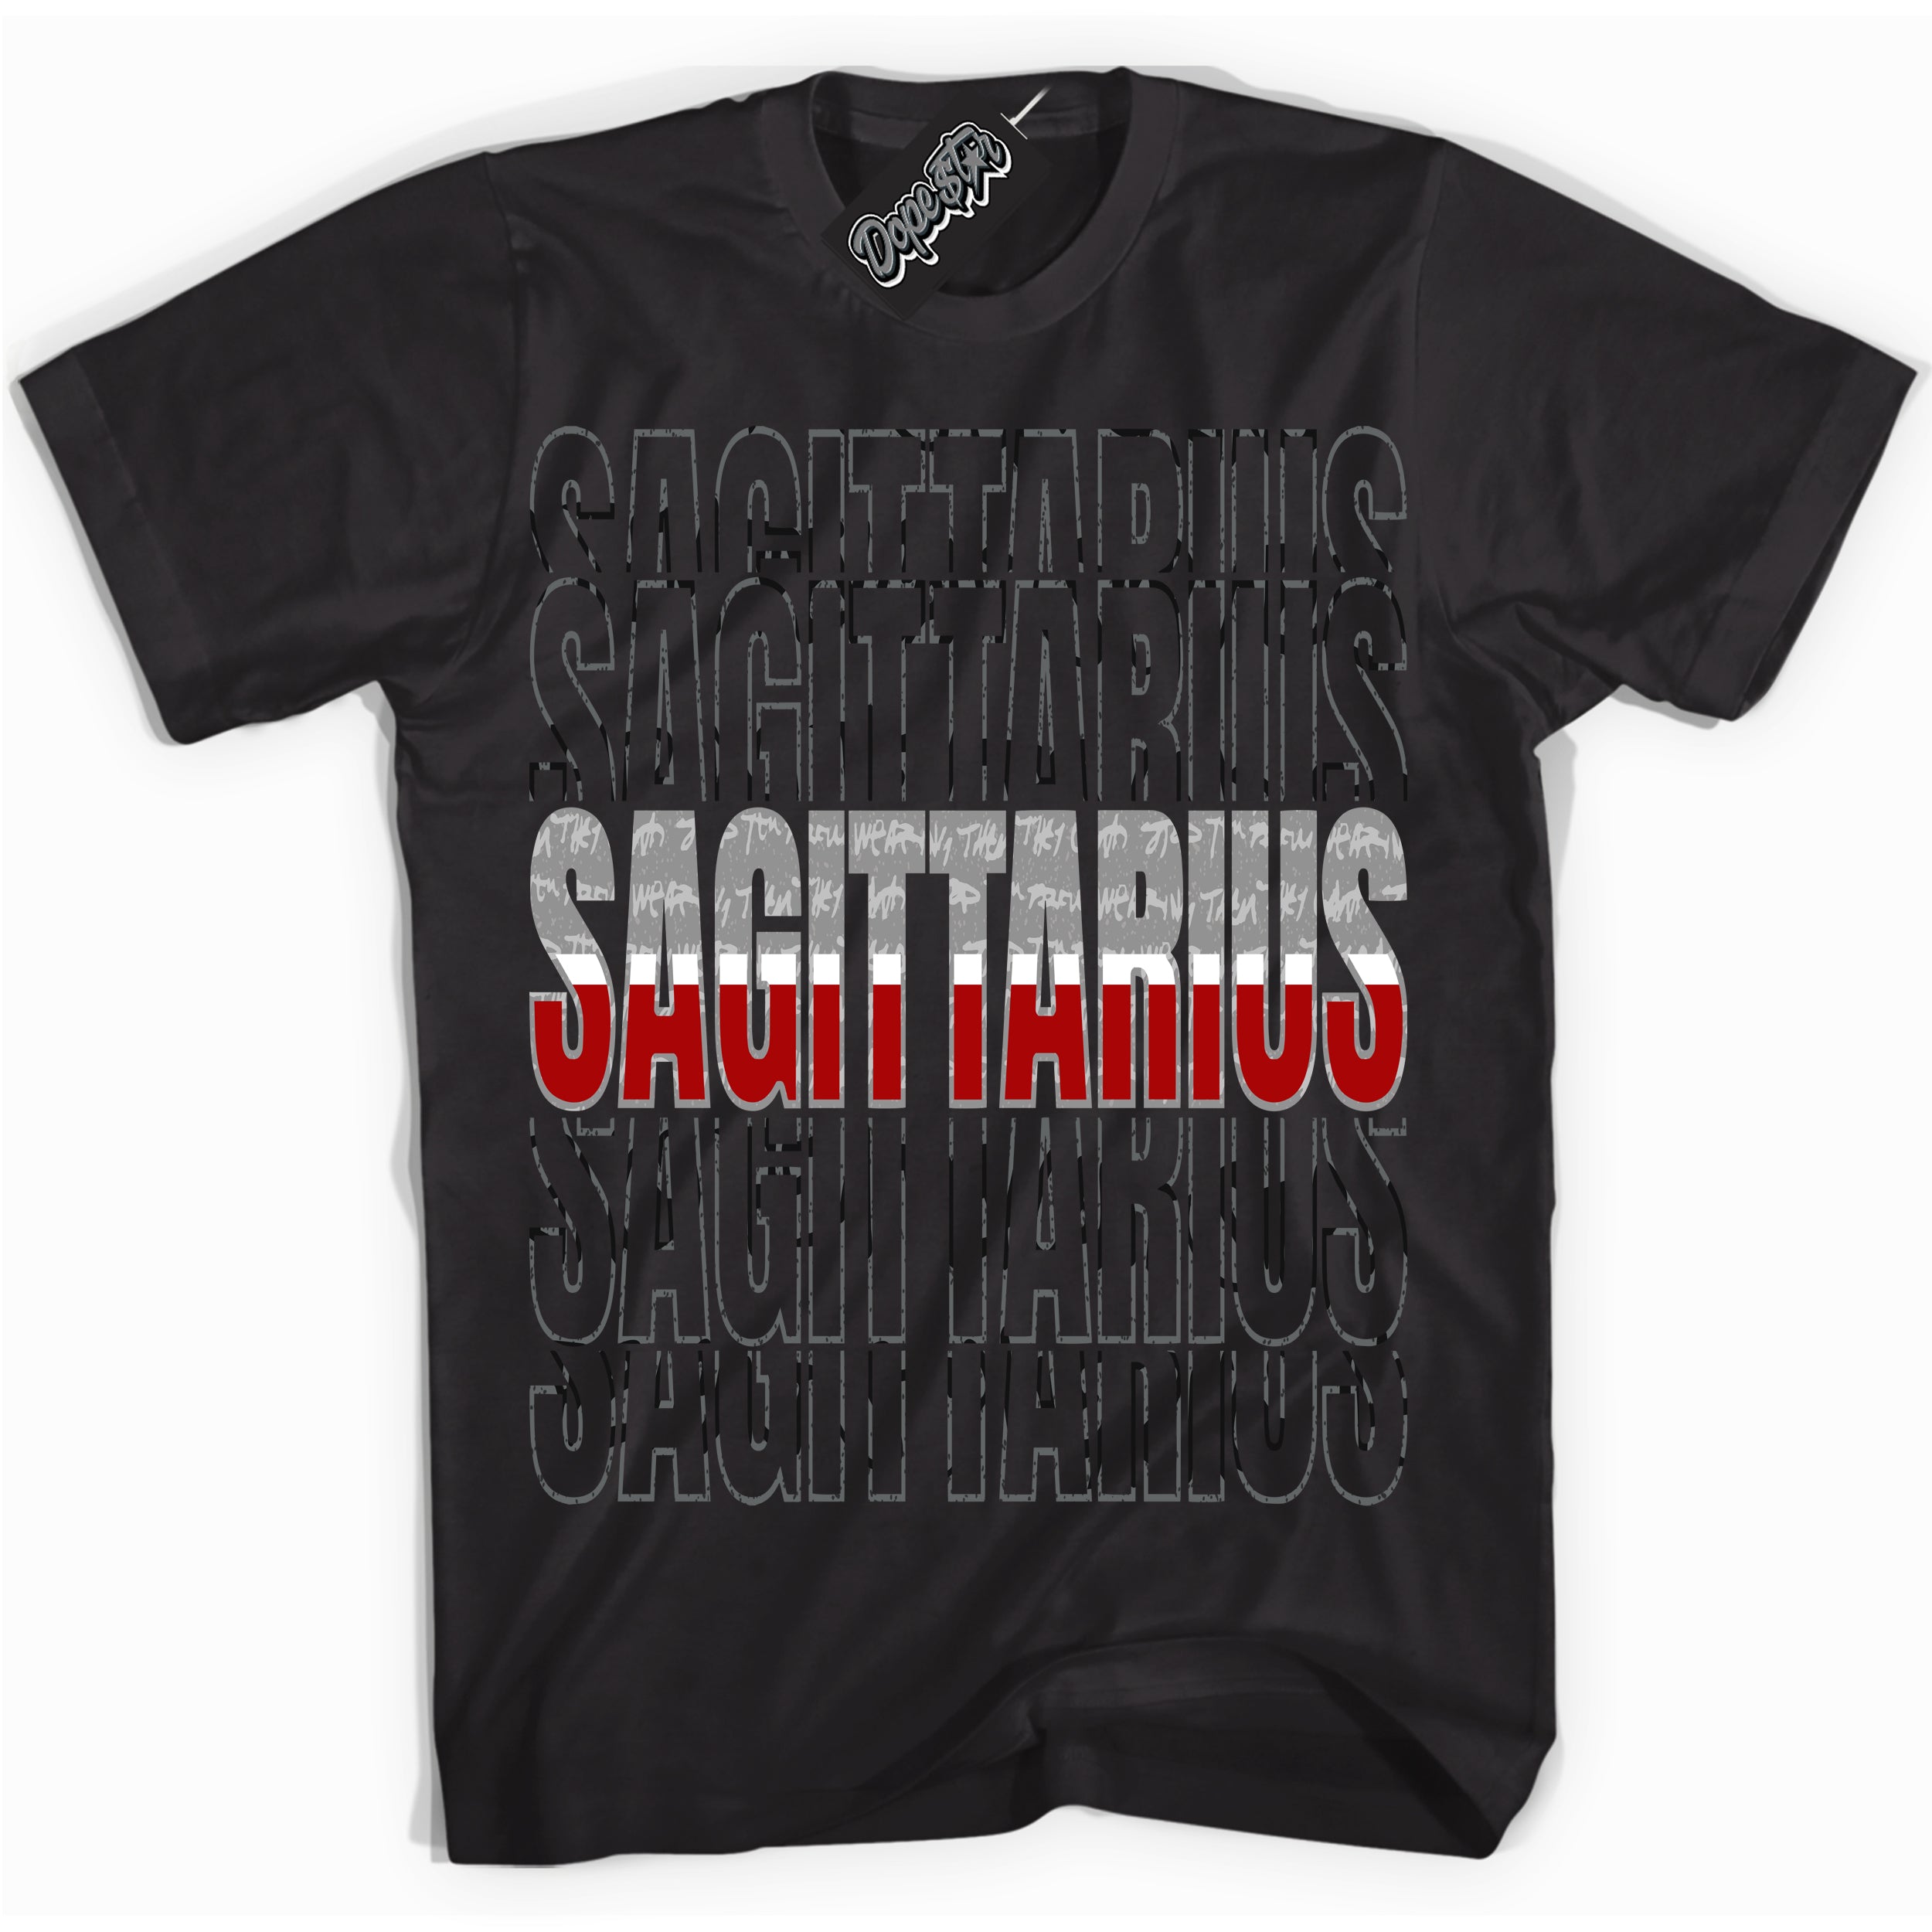 Cool Black Shirt with “ Sagittarius ” design that perfectly matches Rebellionaire 1s Sneakers.